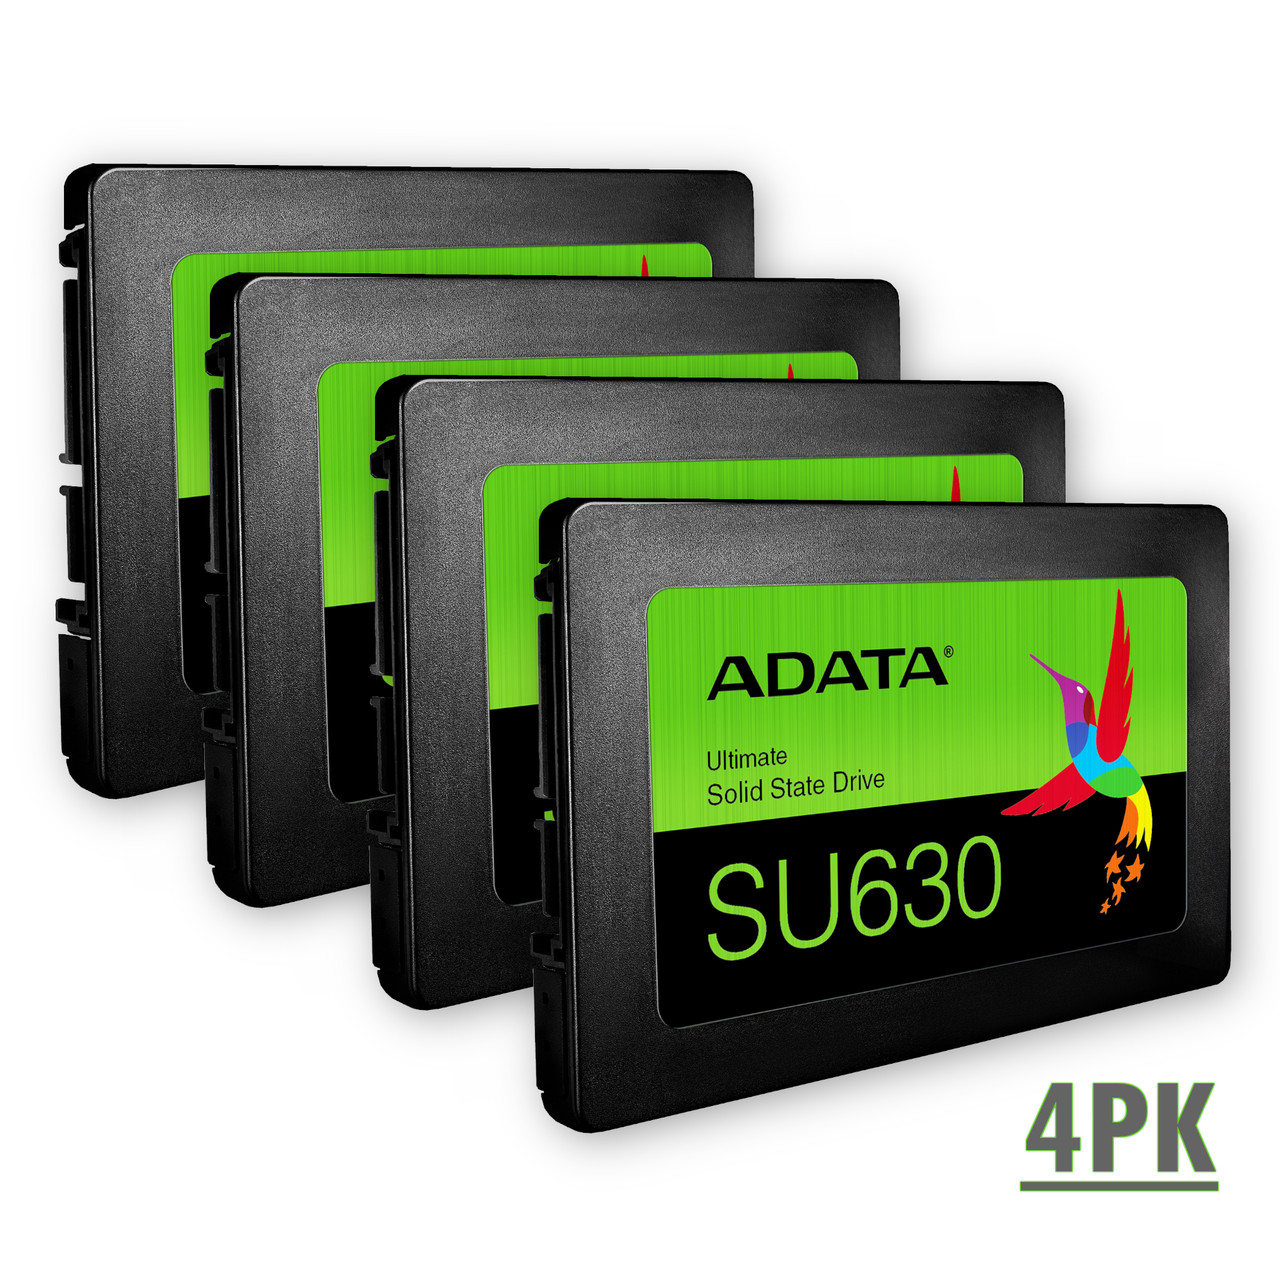 ADATA Ultimate Series: SU630 480GB III - 2.5" 4 Pack of Internal Solid State Drives | 3D QLC - Black/Green SSD | Up to 520MBps - 4PK - ADATA